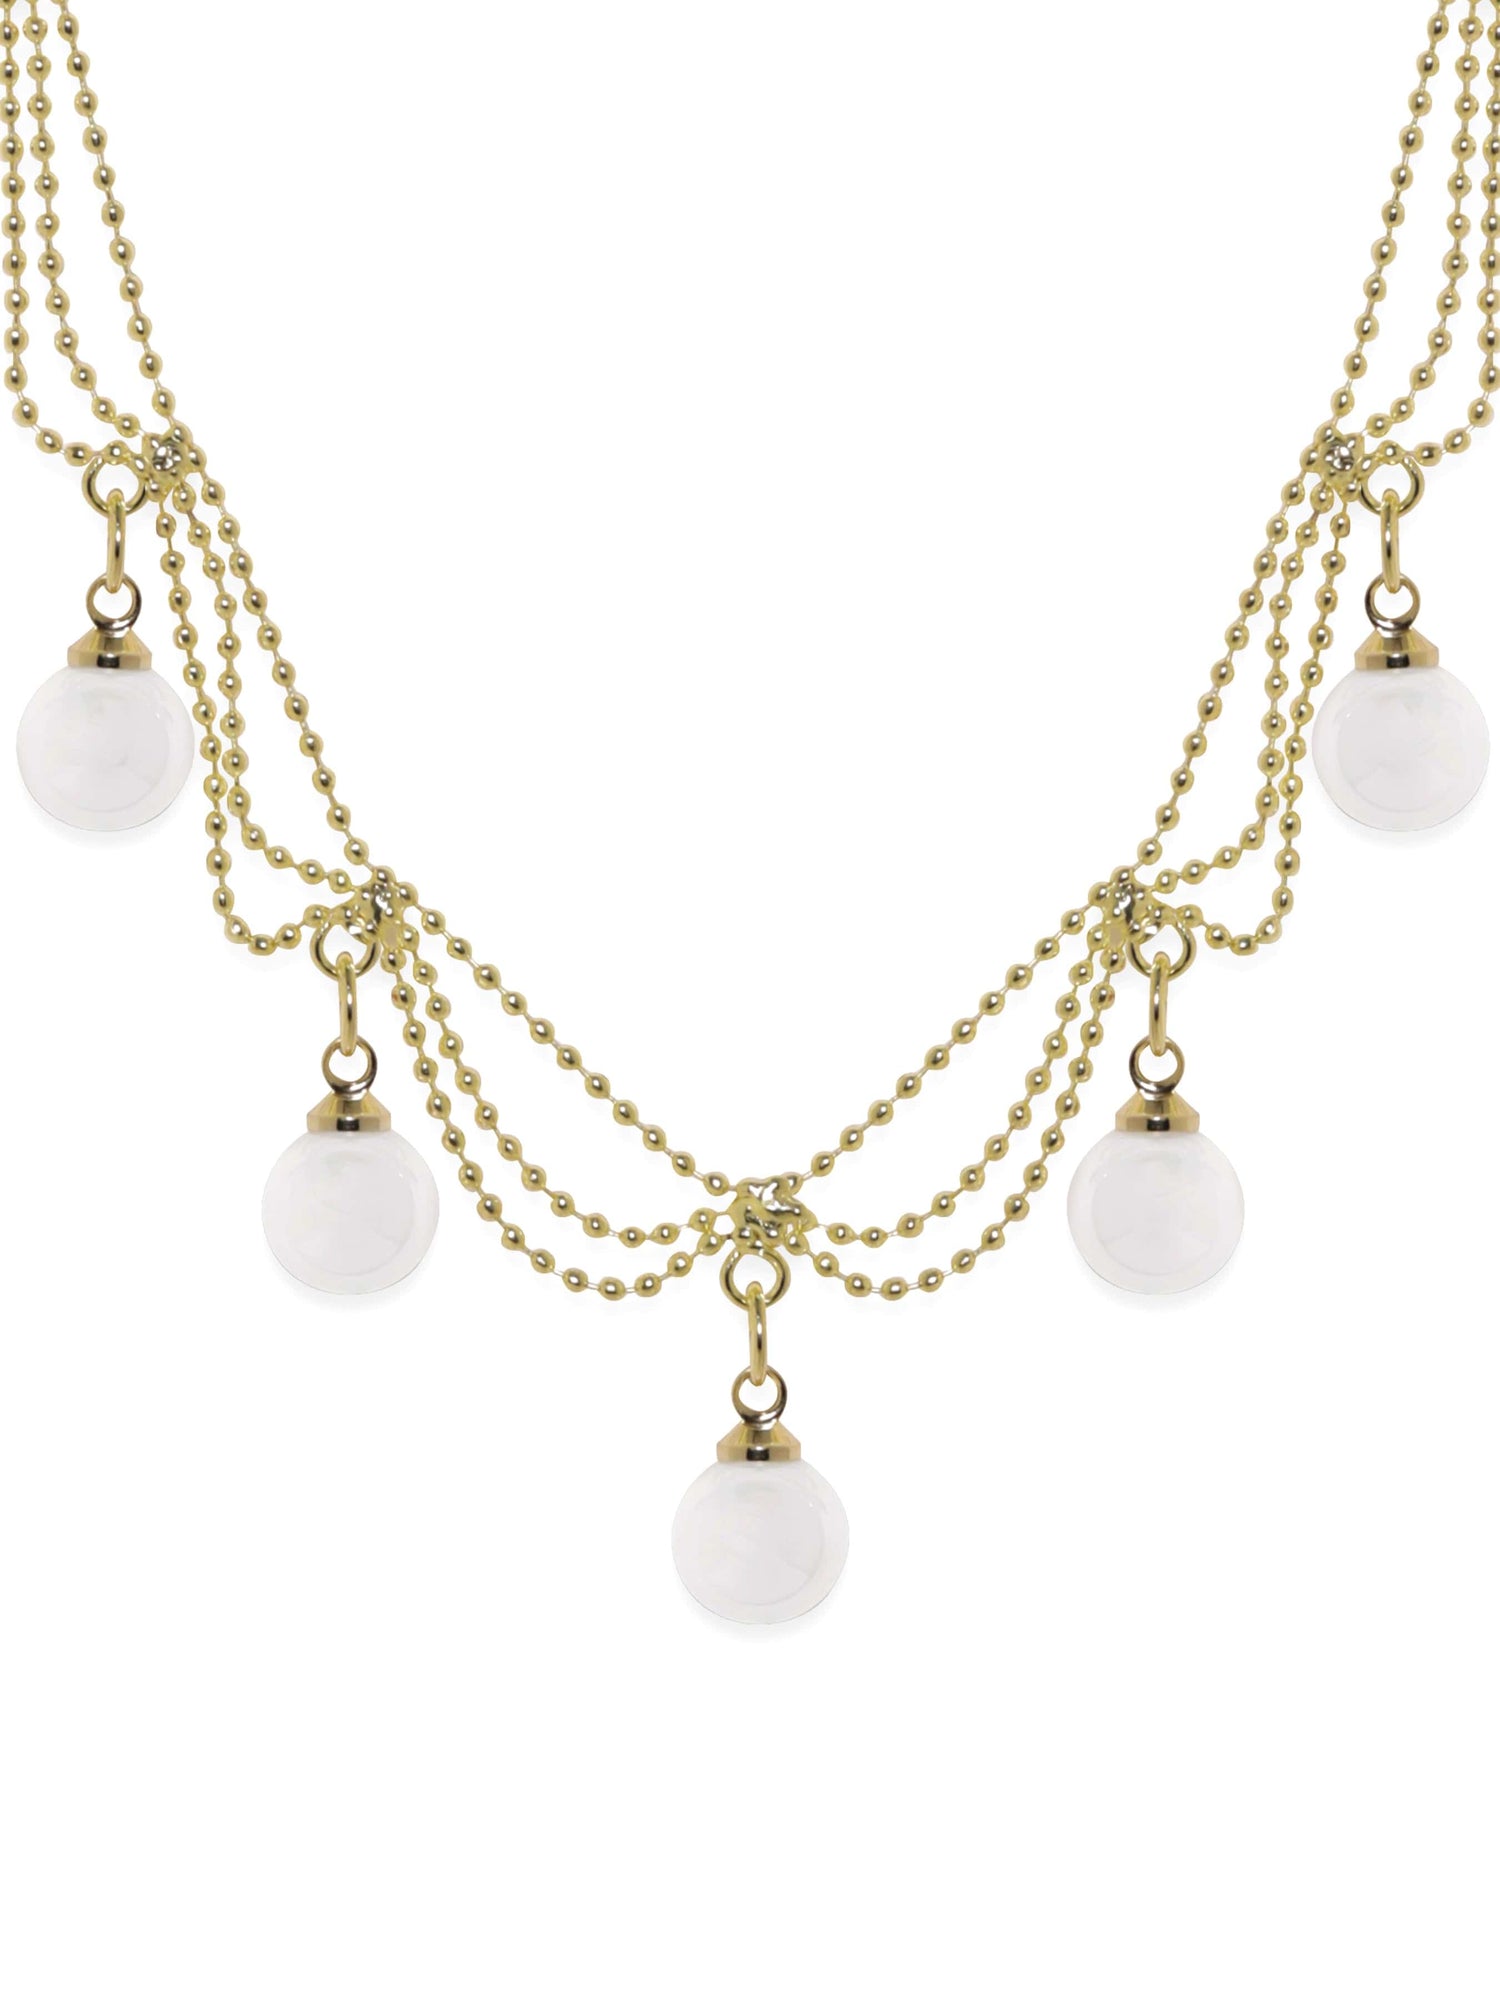 Rubans Voguish 18K Gold Plated Layered Chain With Bead Dangle Necklace.  Necklace